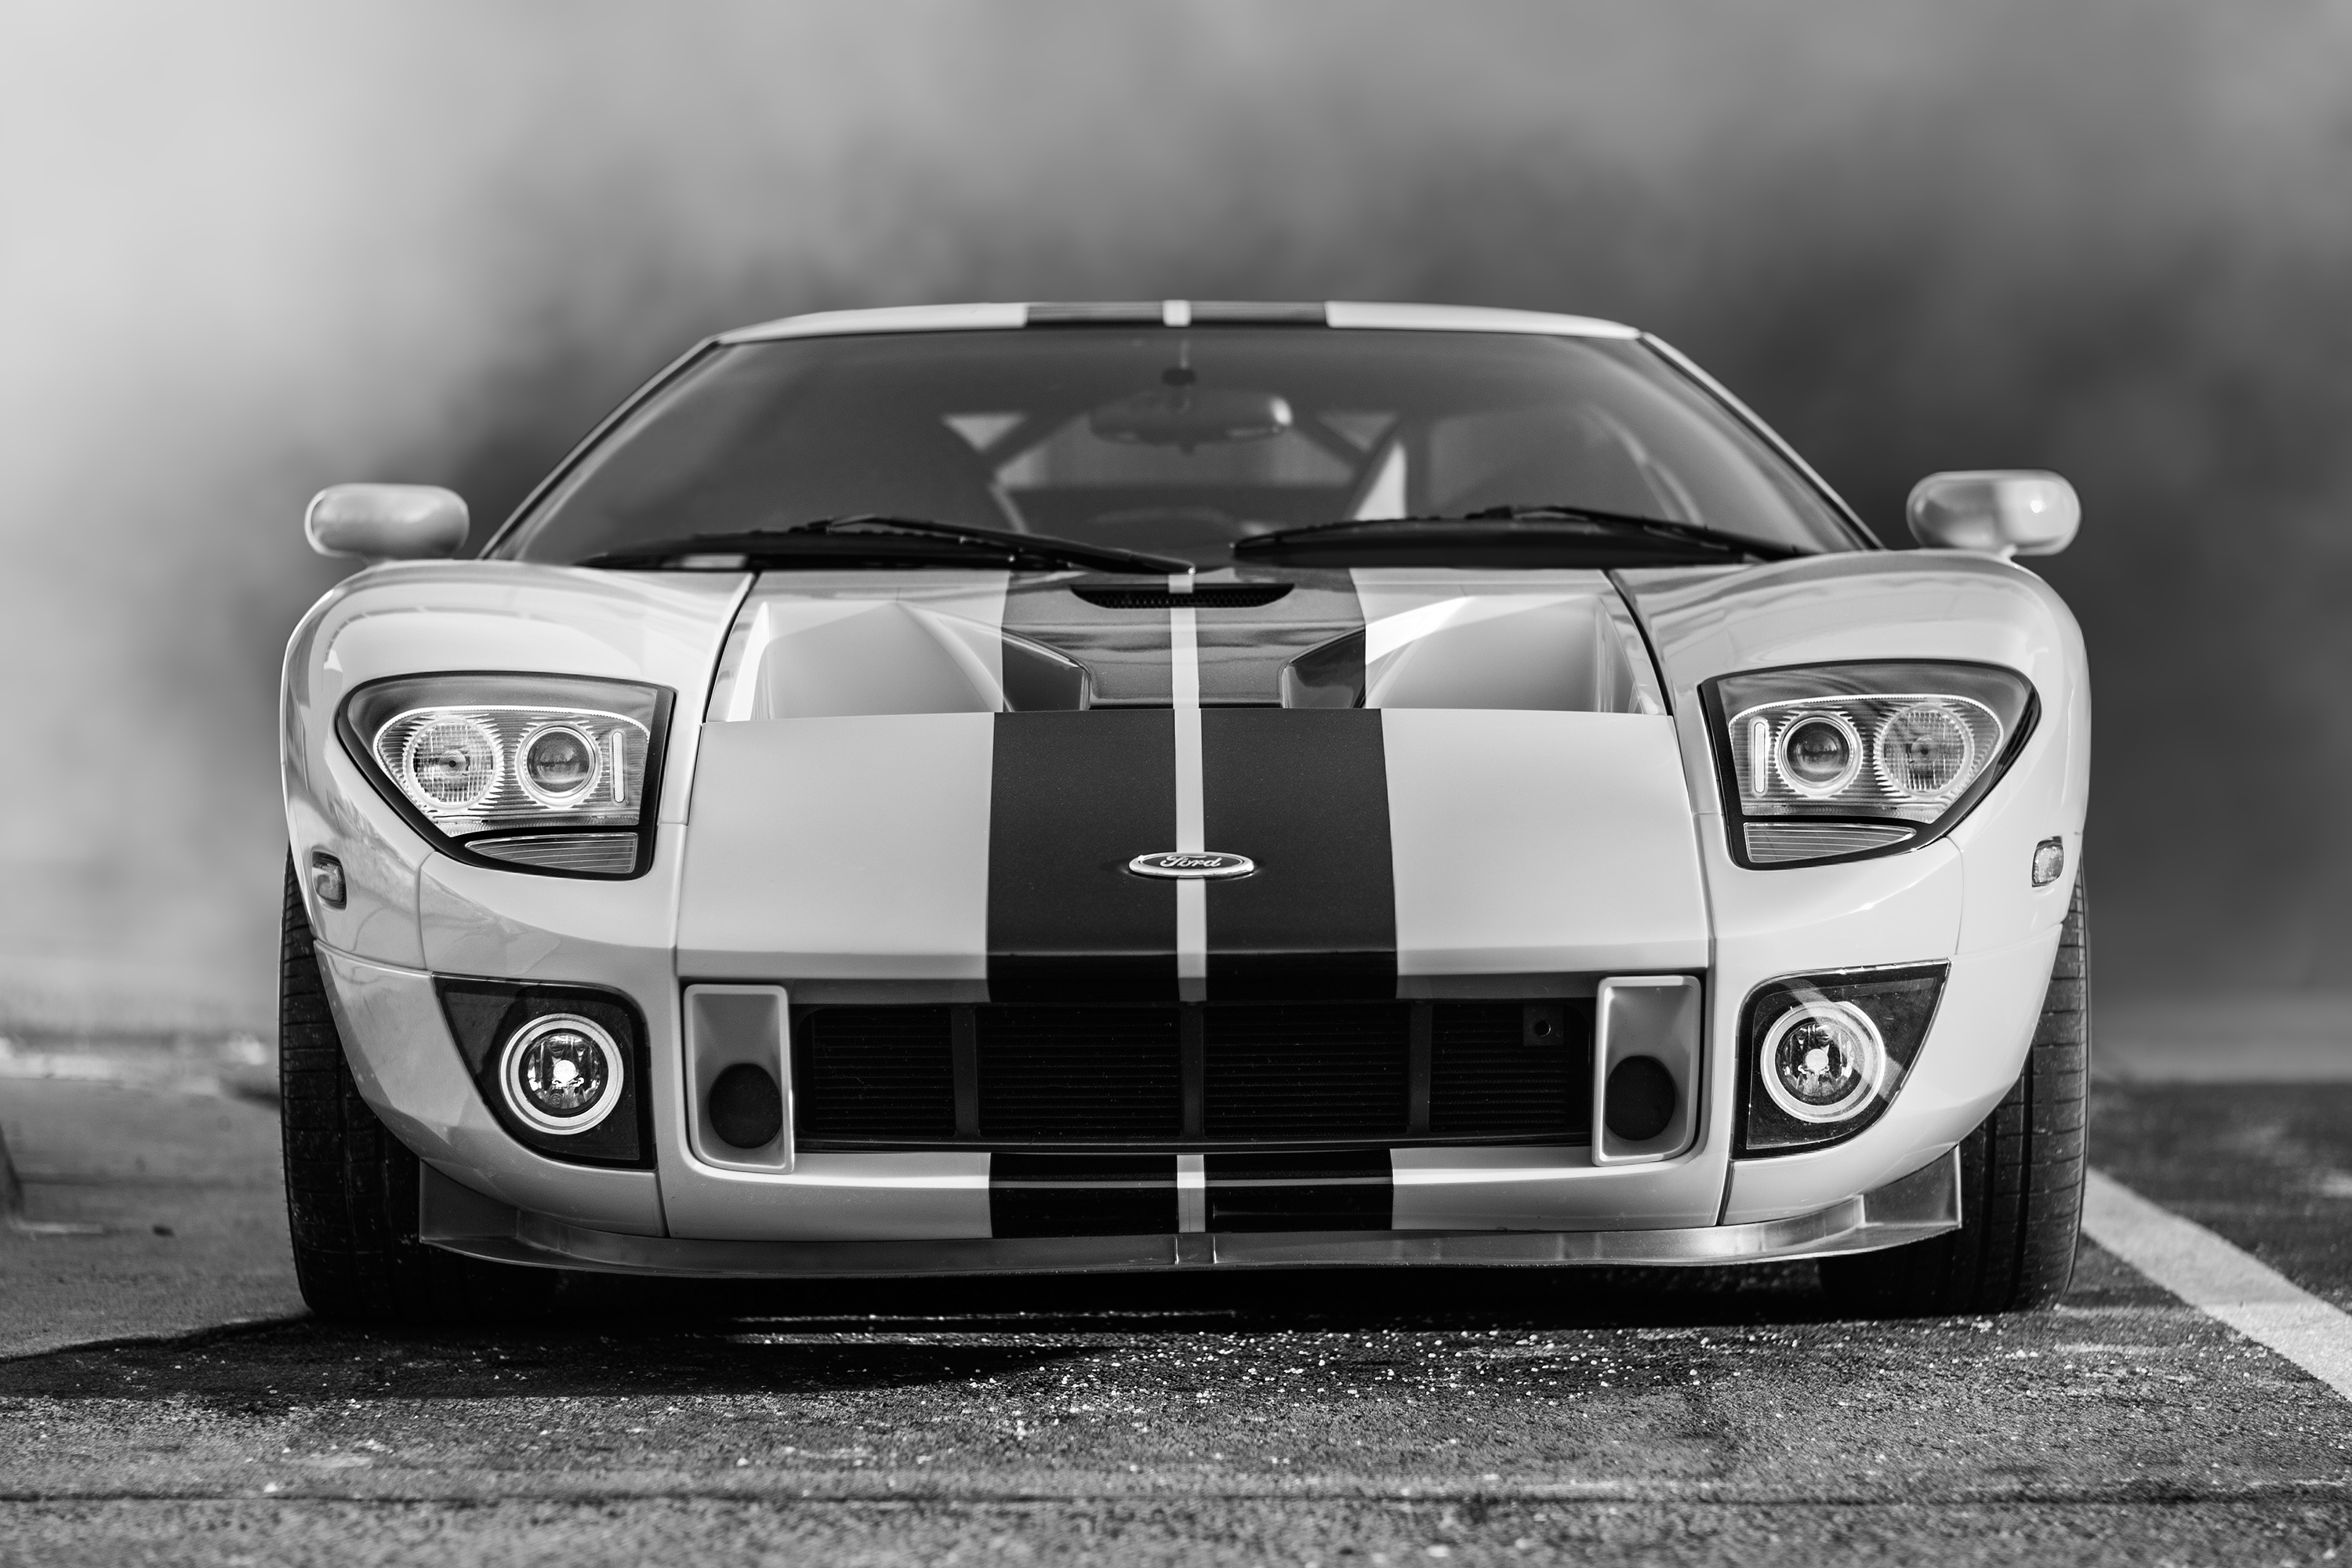 android cars, chb, ford, lights, bw, headlights, ford gt